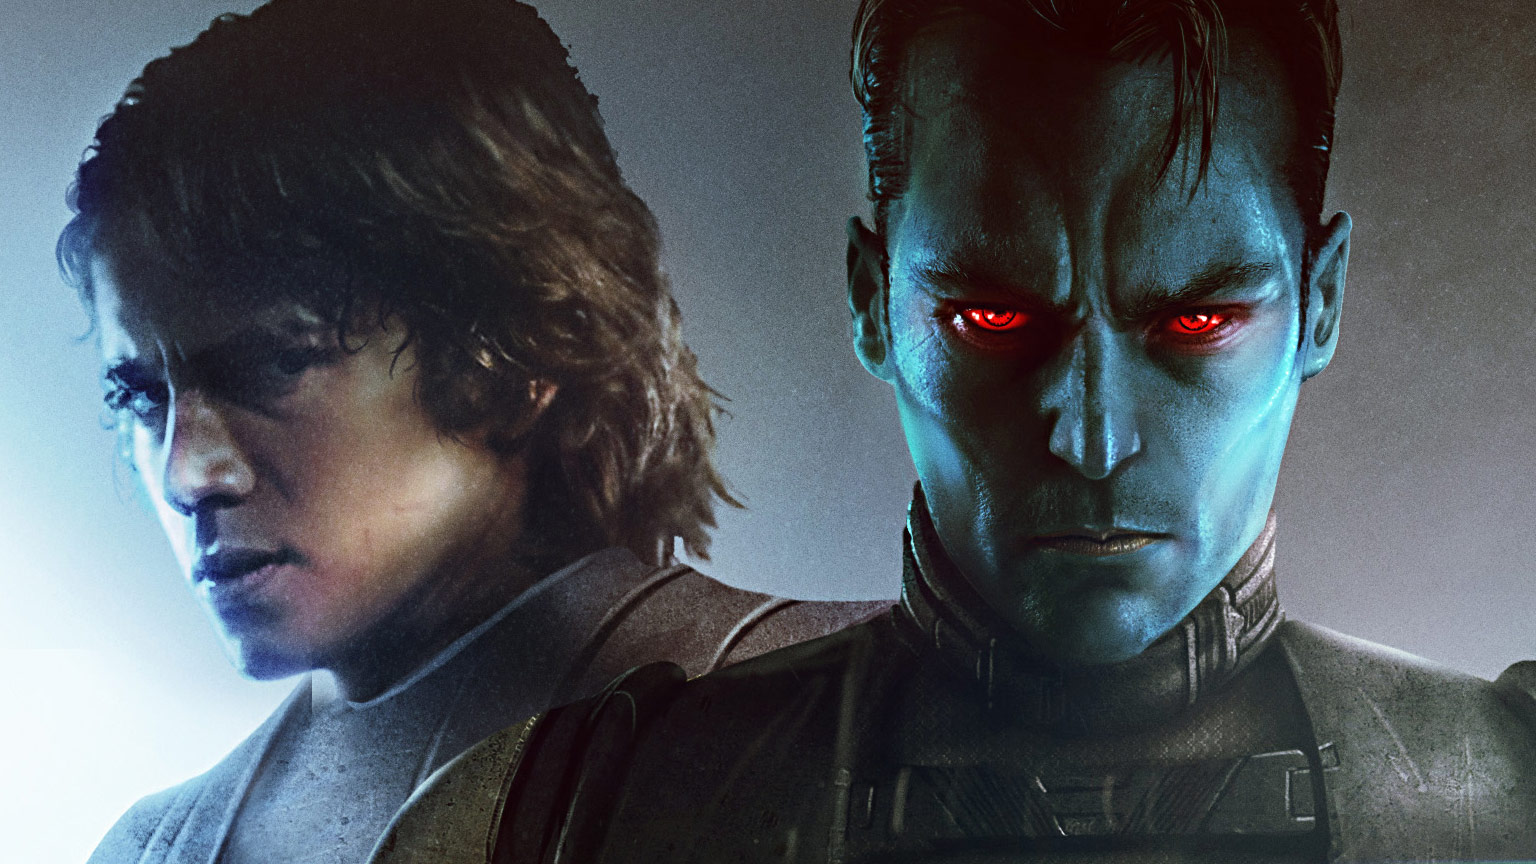 Thrawn: Alliances alternate coverI hope they blend the eyes on that actor a little better for the final version